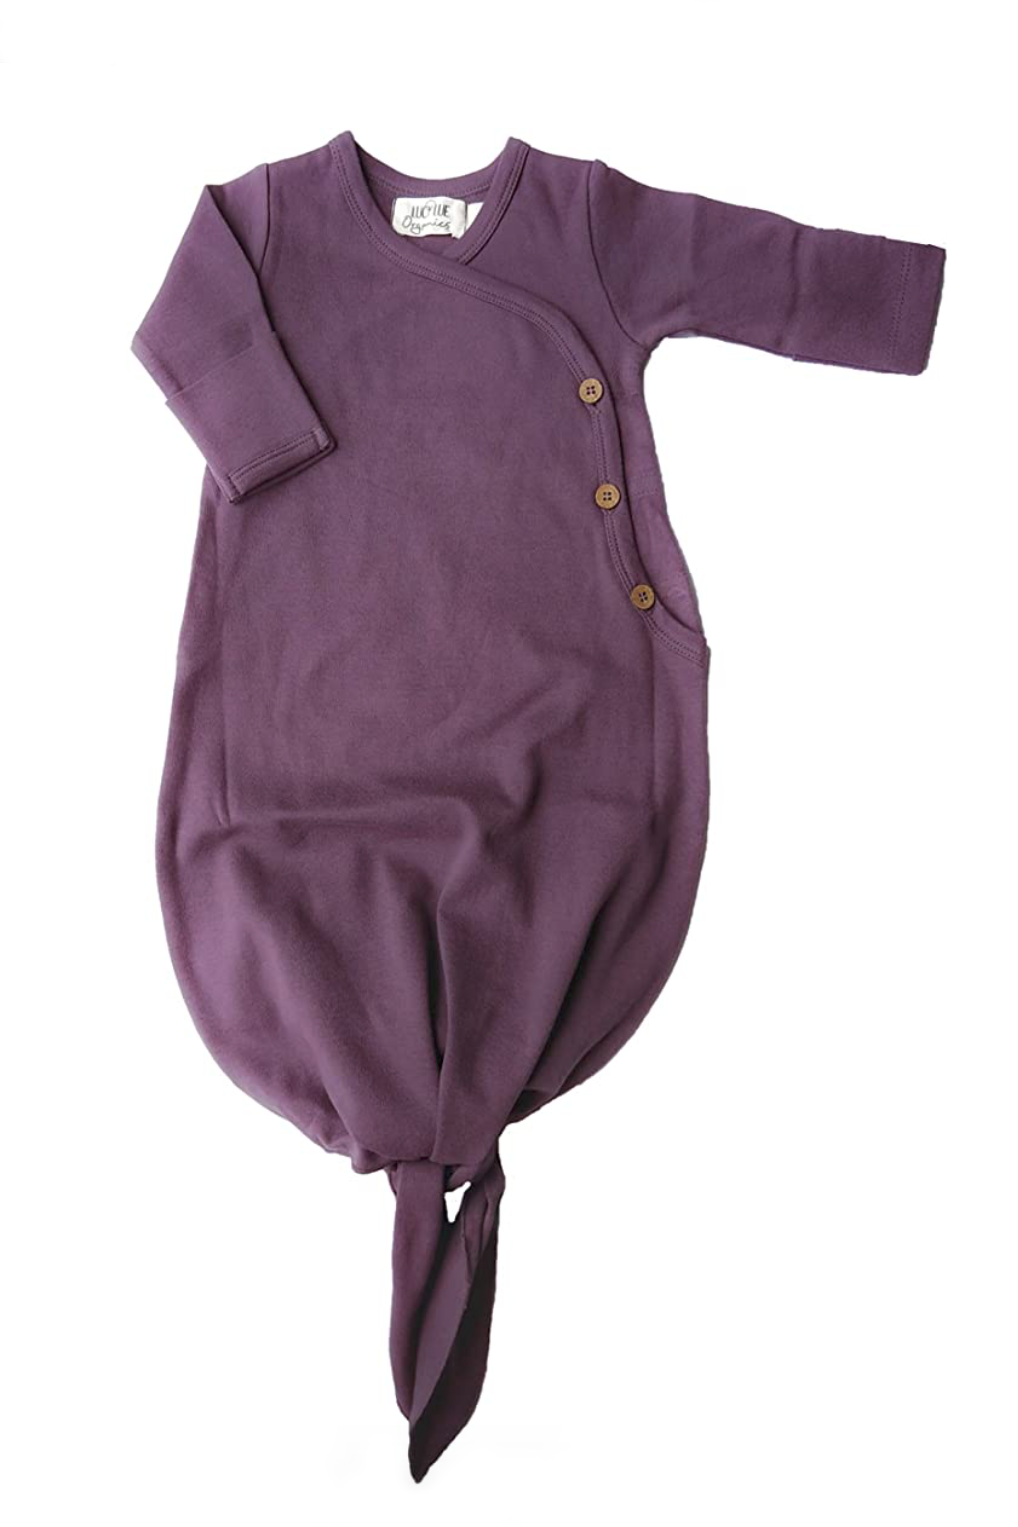 Lucy Lue purple baby gown newborn photographer.png